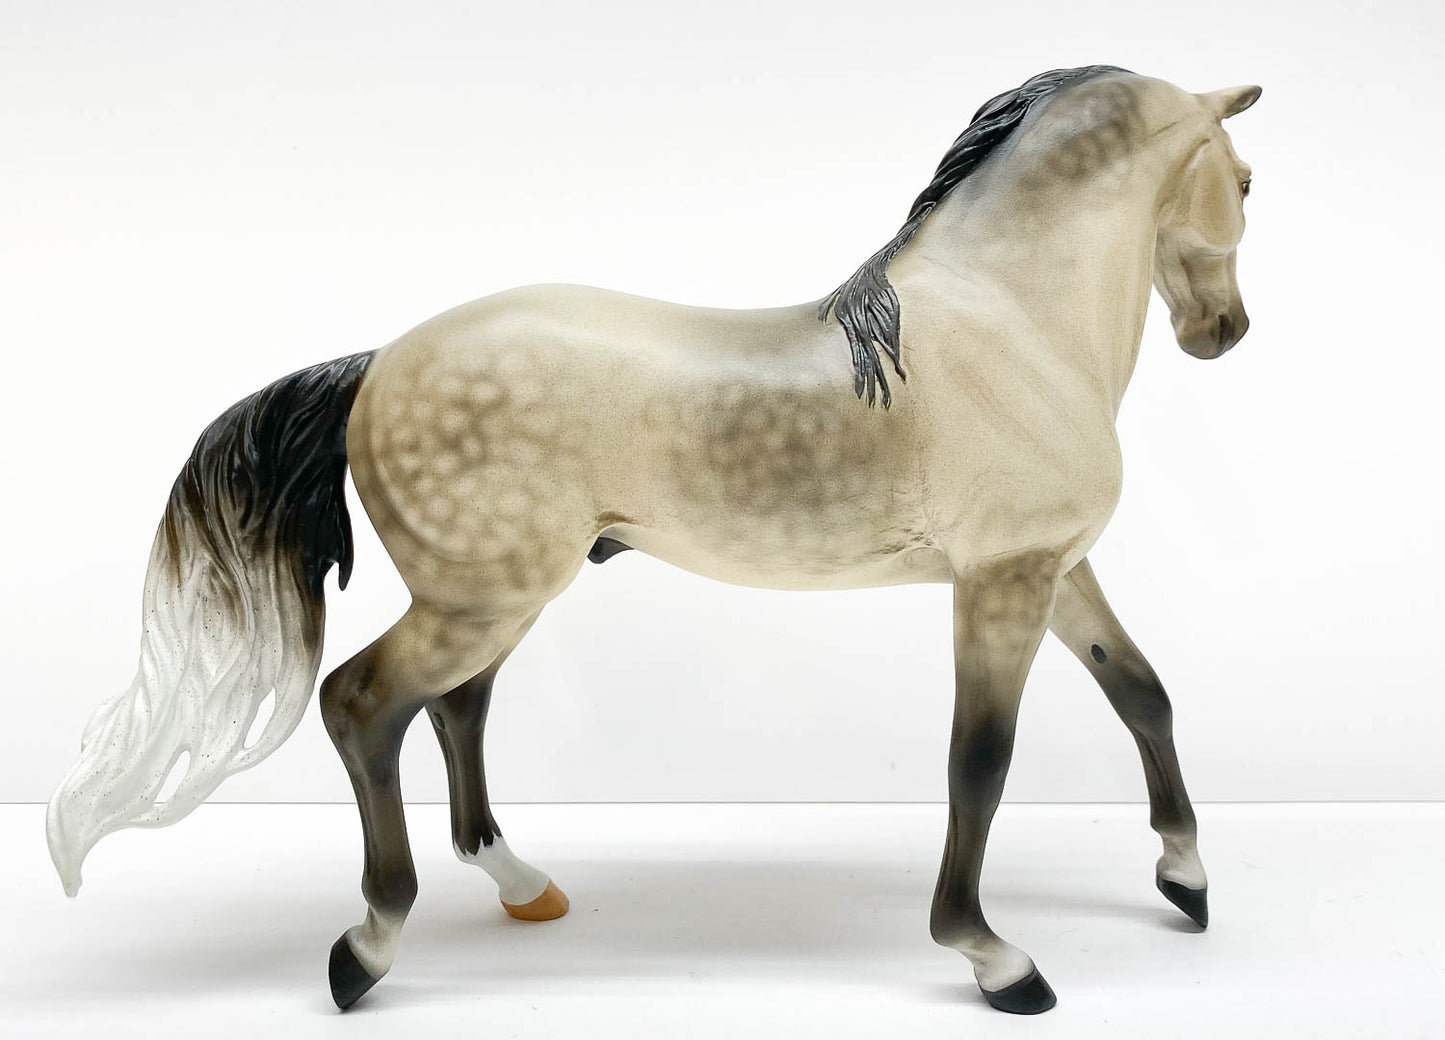 Andalusian ~ Leandro - Breyer Gallery Resin - JCP SR